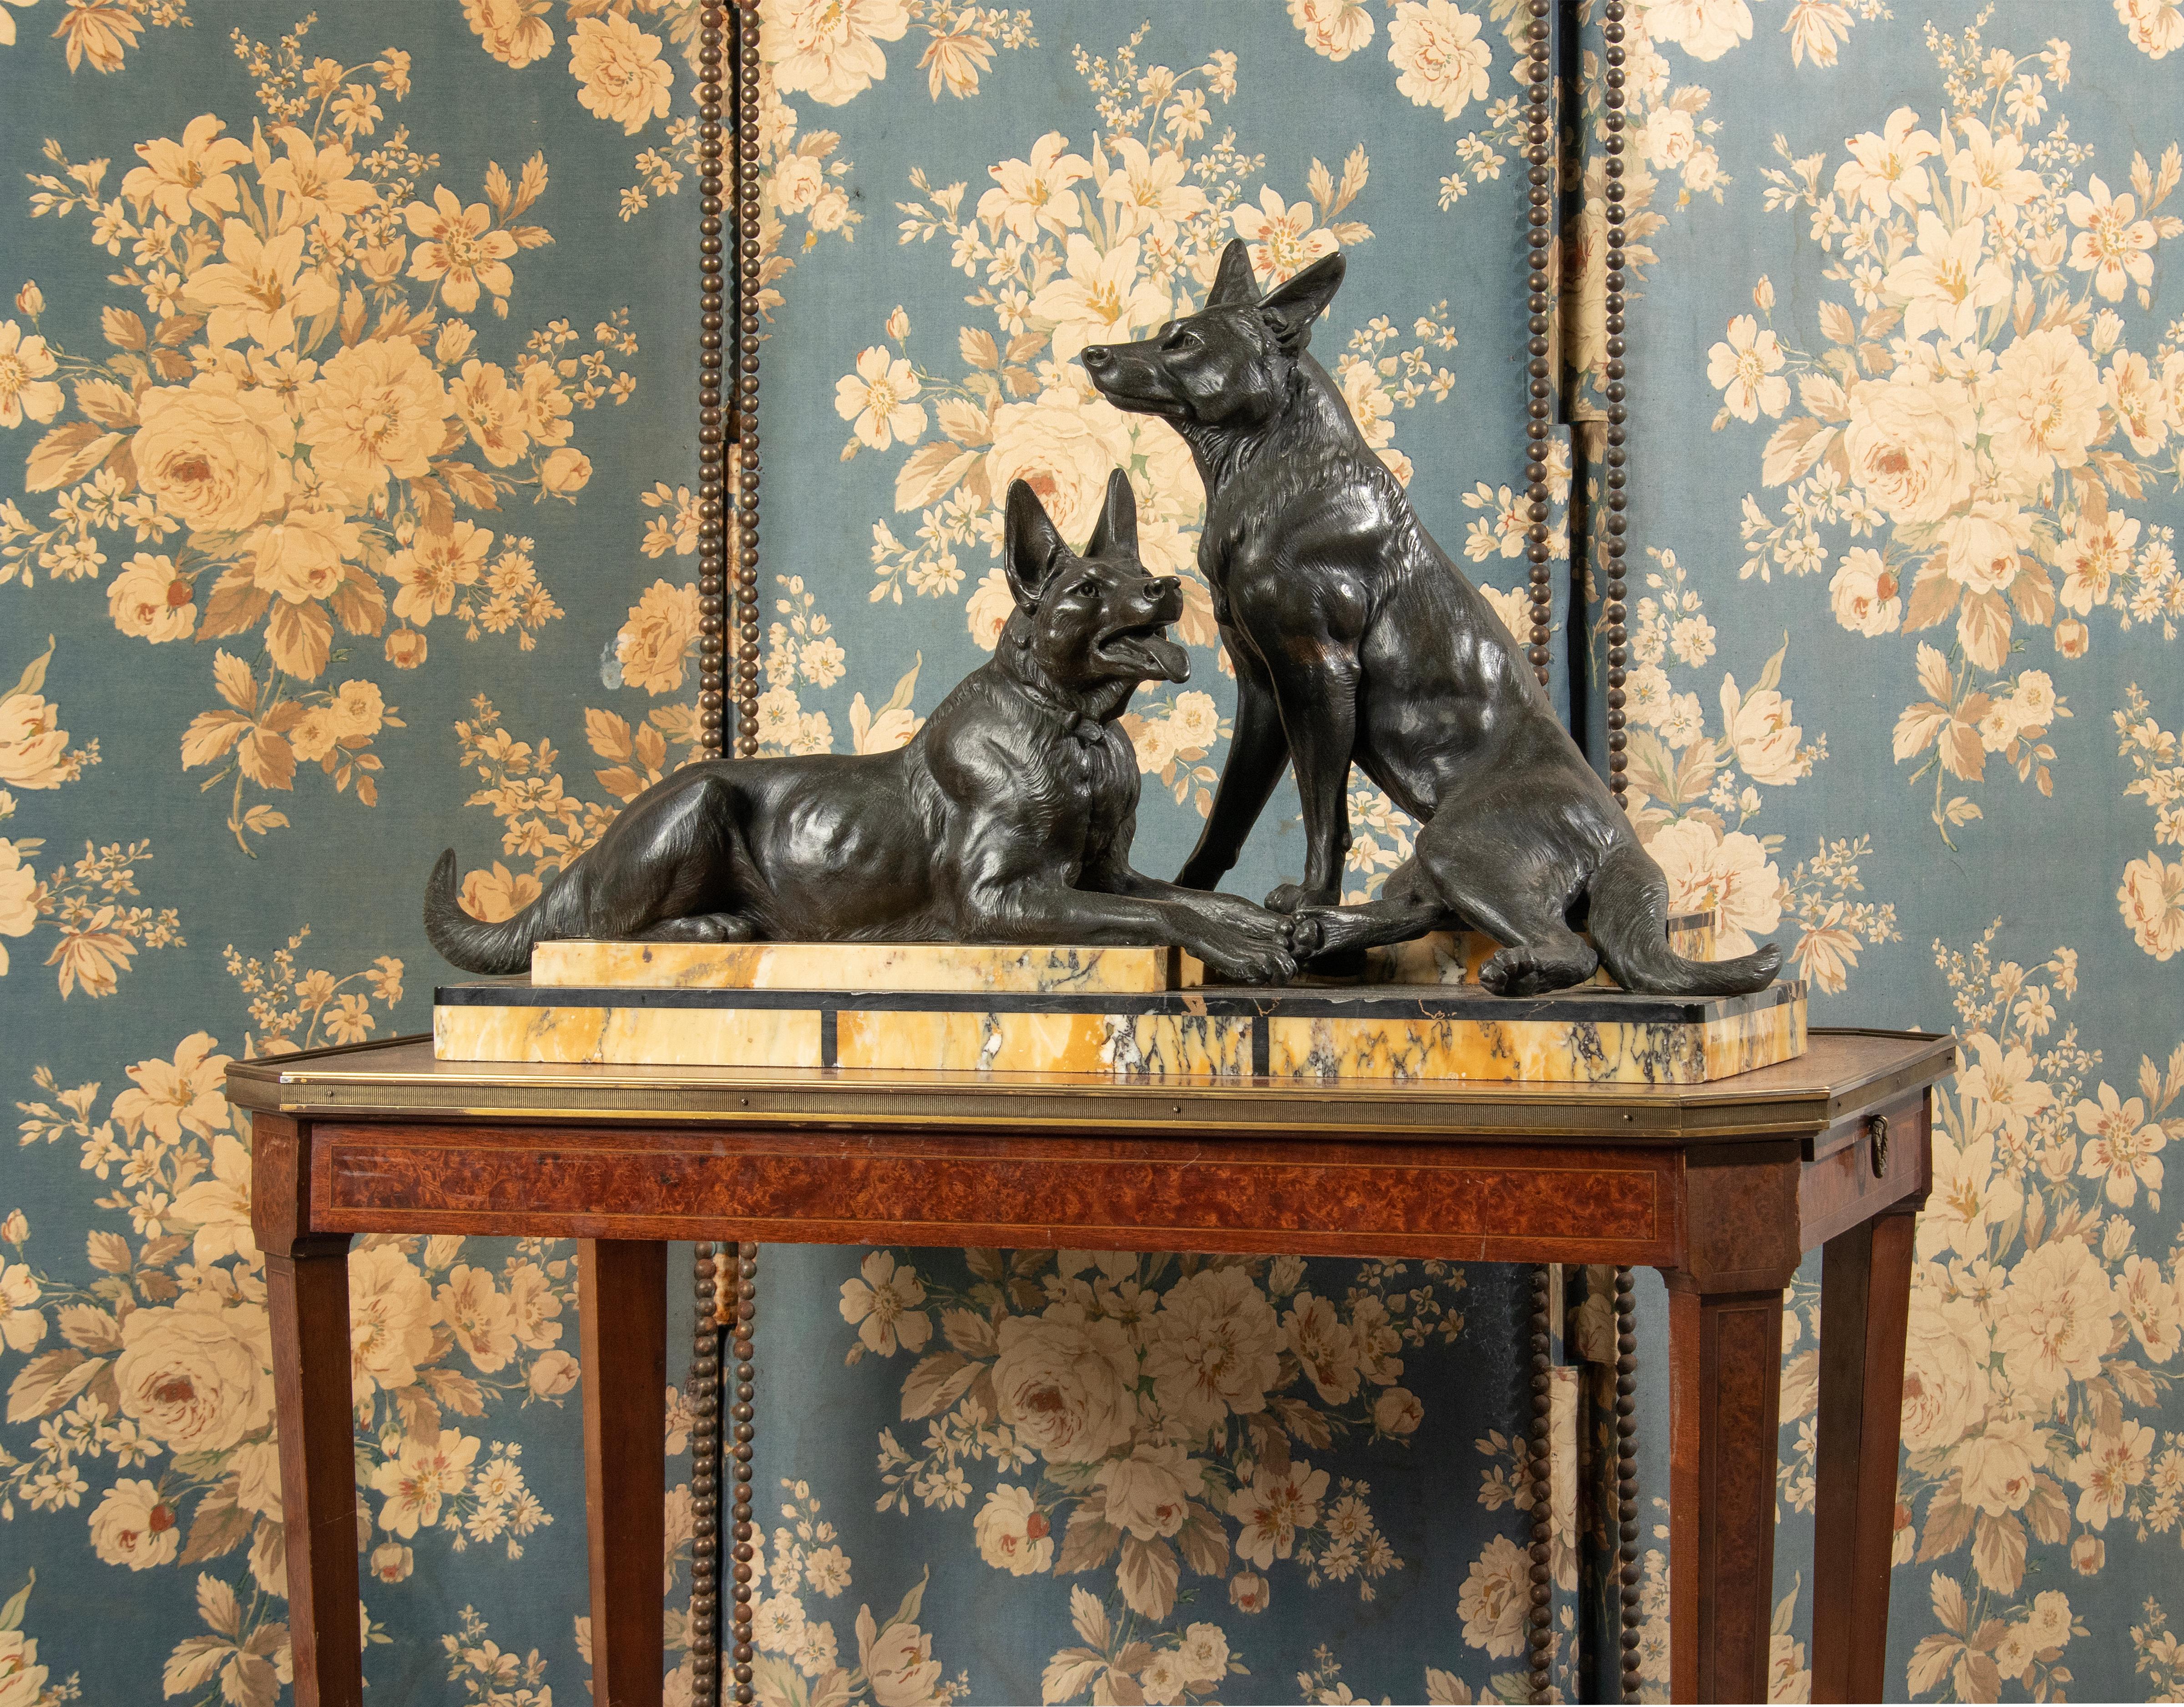 French Art Deco Period Sculpture of German or Belgian Sheppards by Louis Carvin For Sale